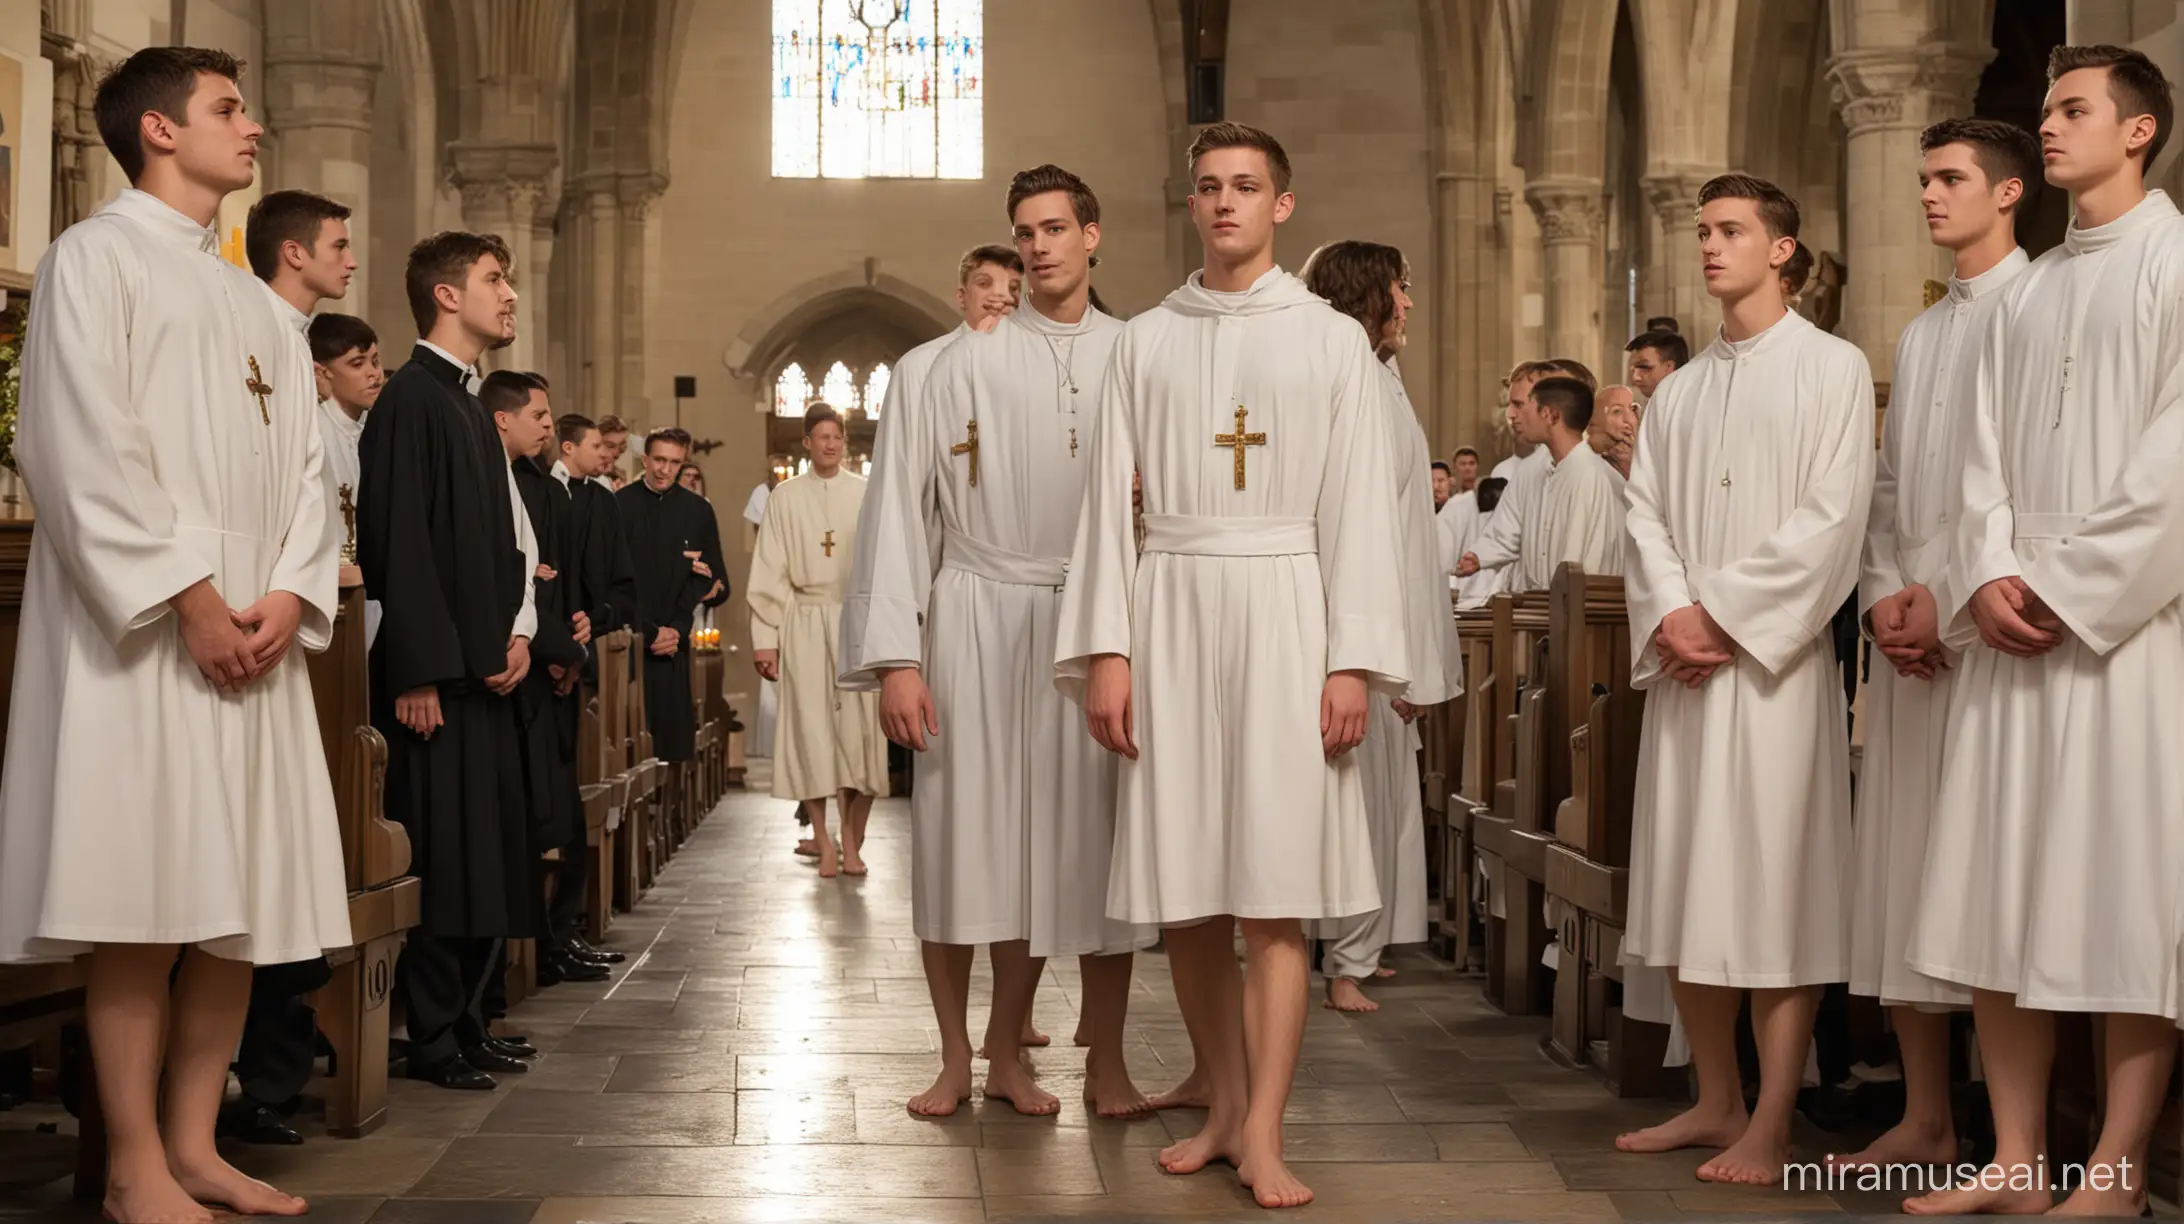 Sensual Young Men Receiving Communion from Priest in Church